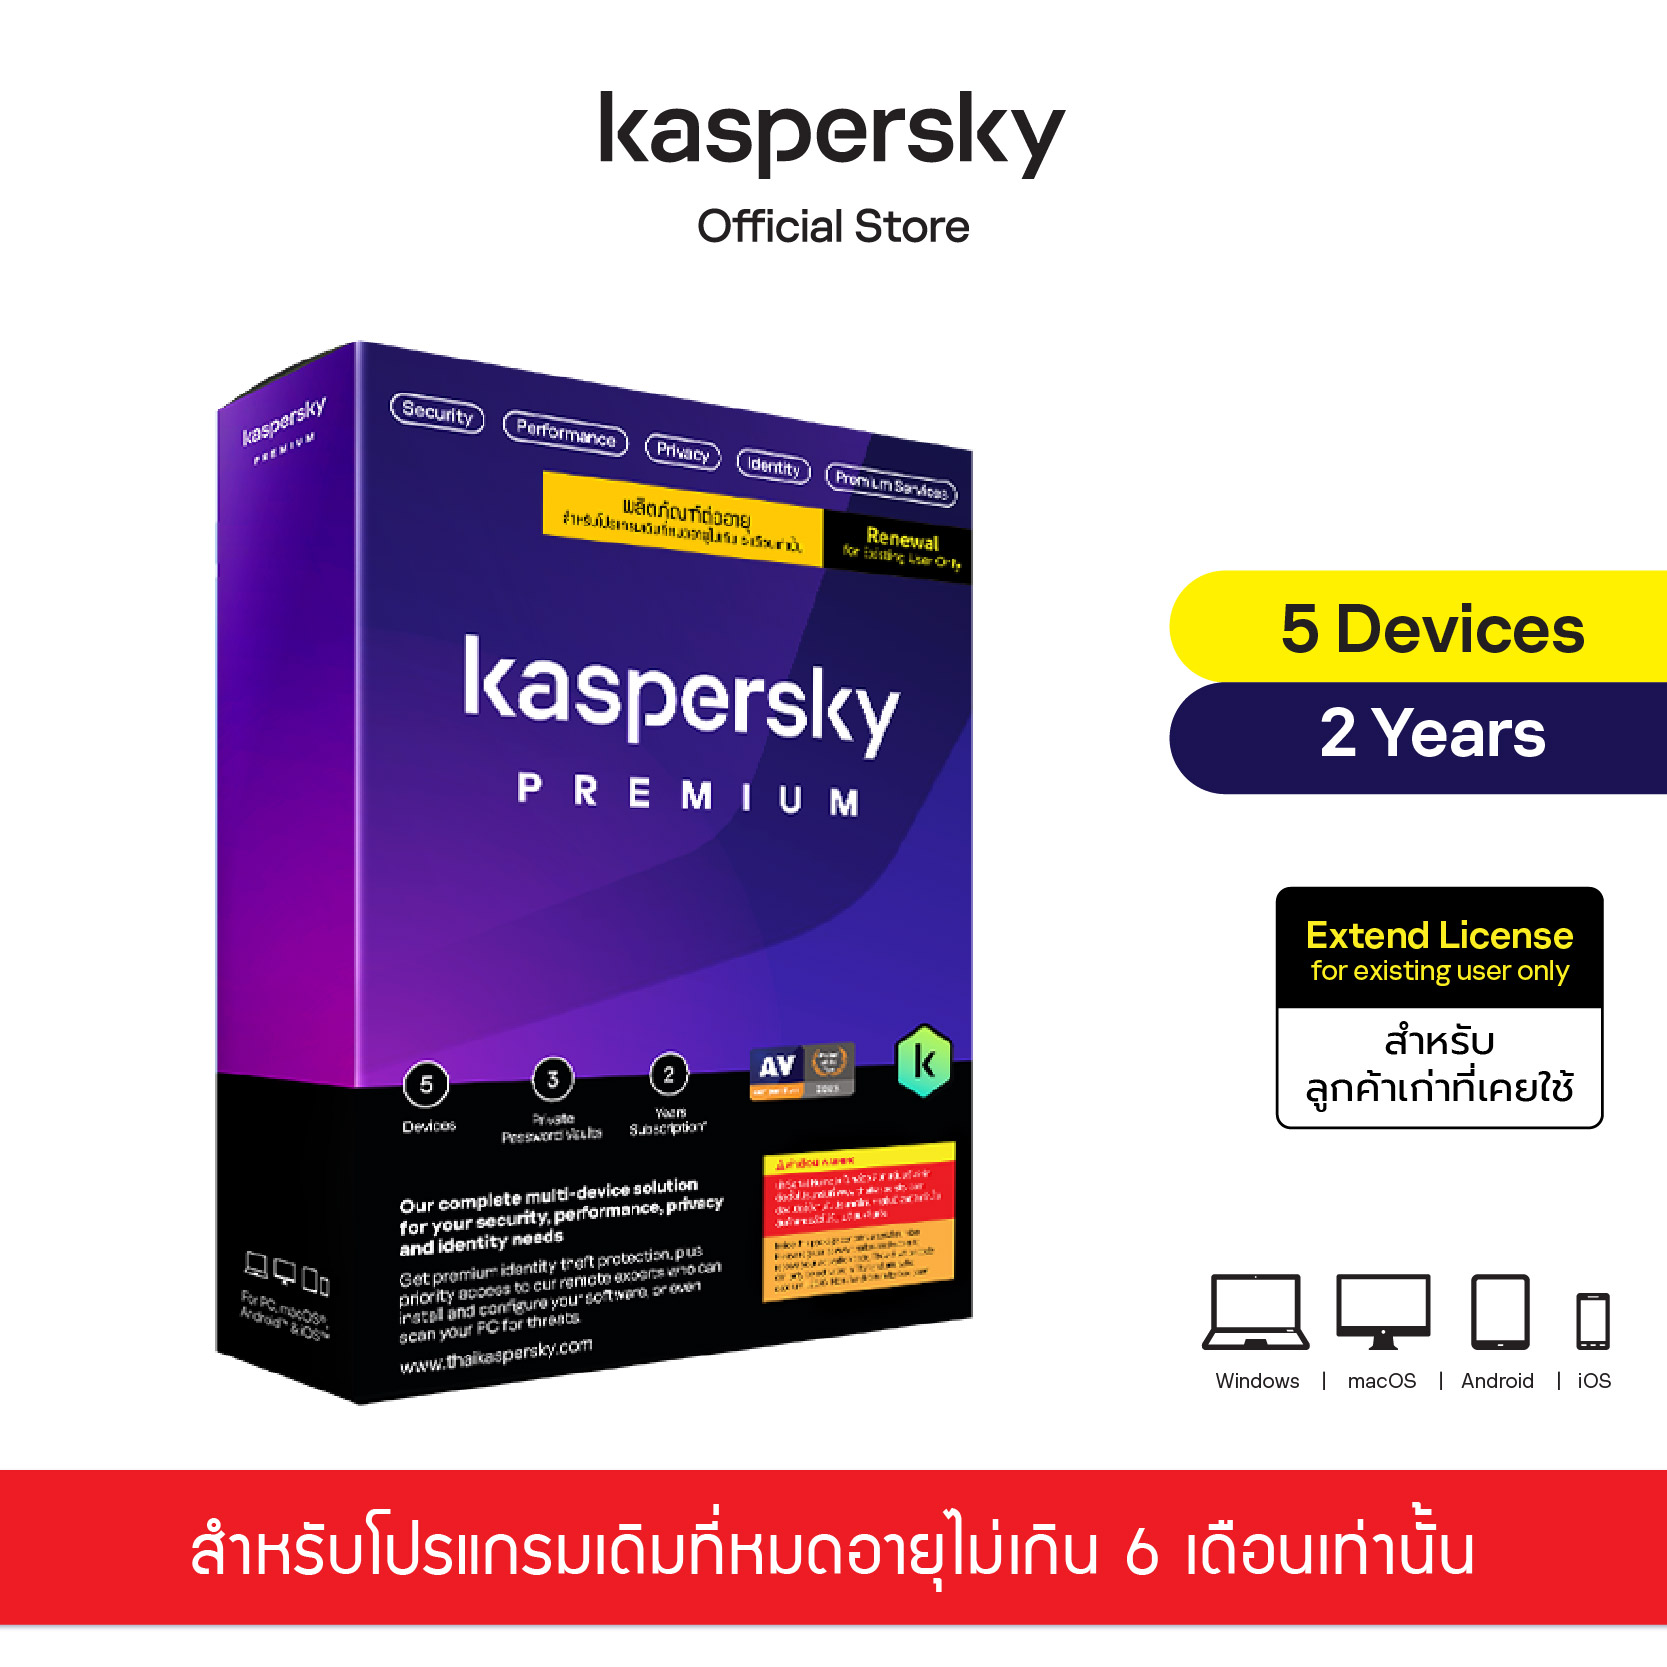 Kaspersky Premium 5 Devices 2 Year (Extend License)